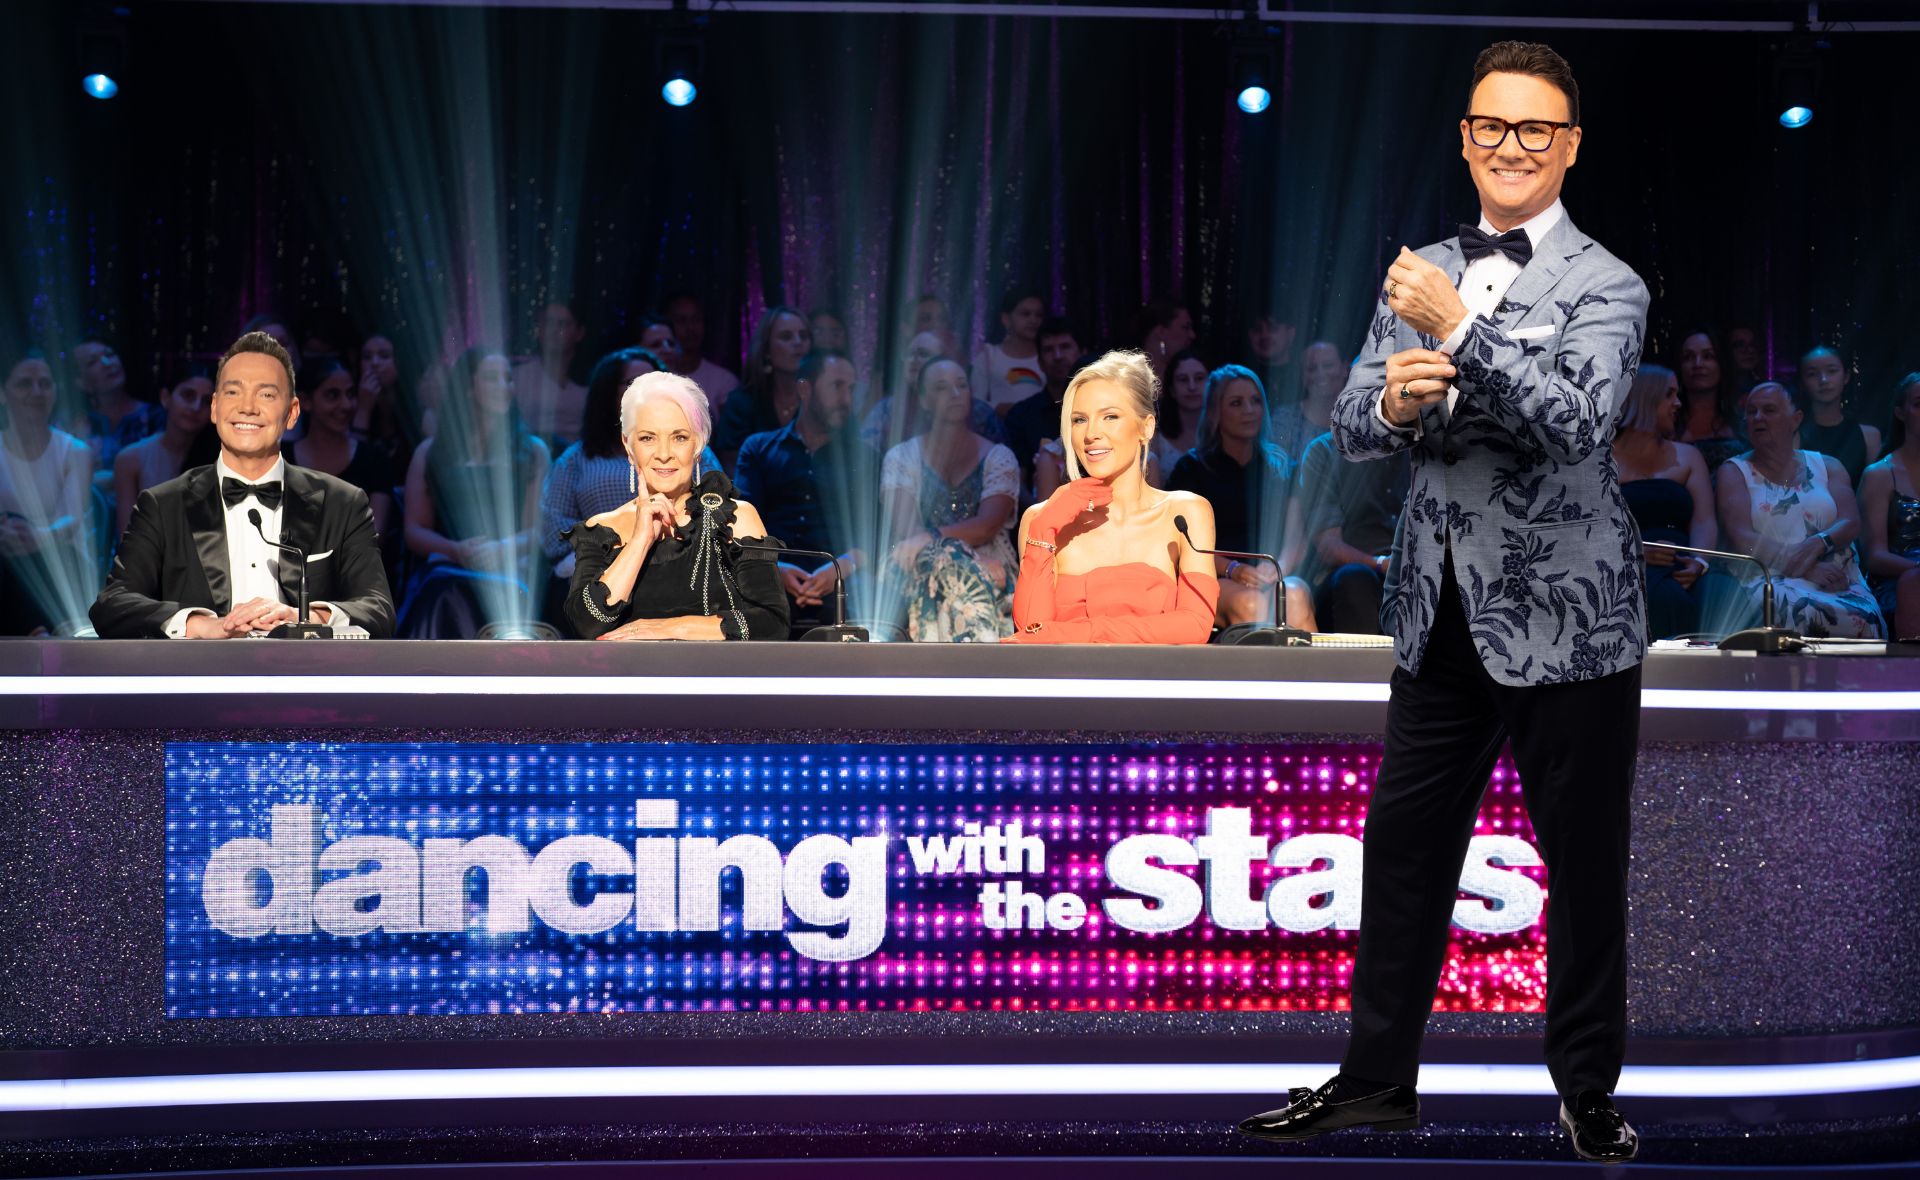 EXCLUSIVE: Dancing With The Stars judge Mark Wilson – “I was shocked this year!”